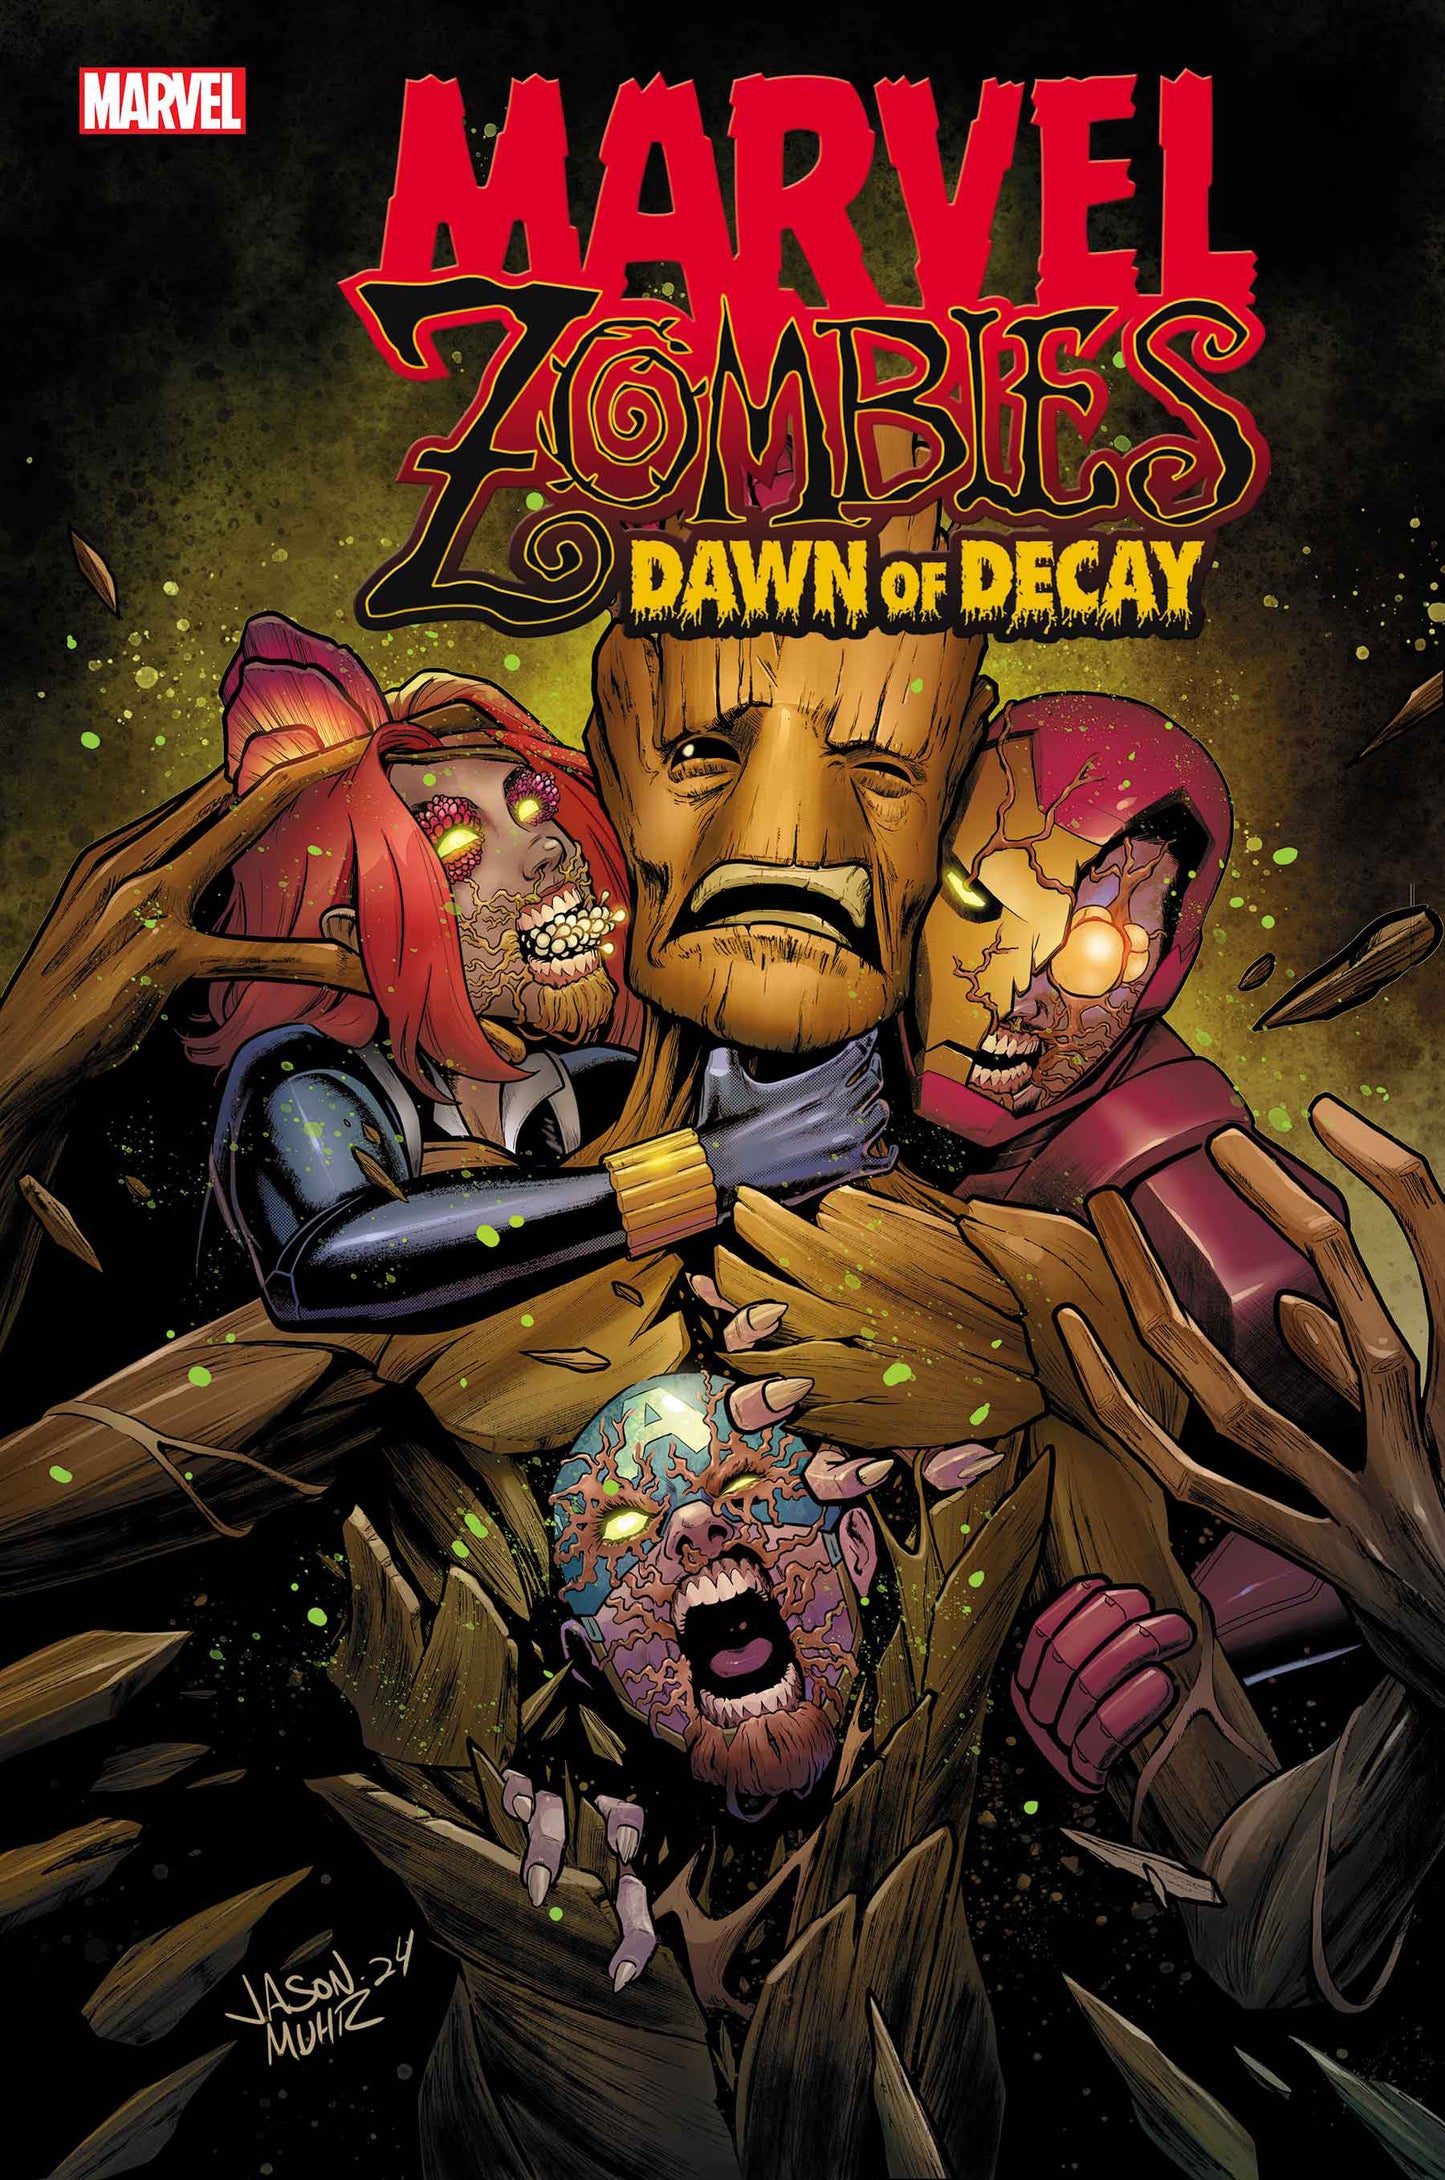 MARVEL ZOMBIES: DAWN OF DECAY #1 POSTER